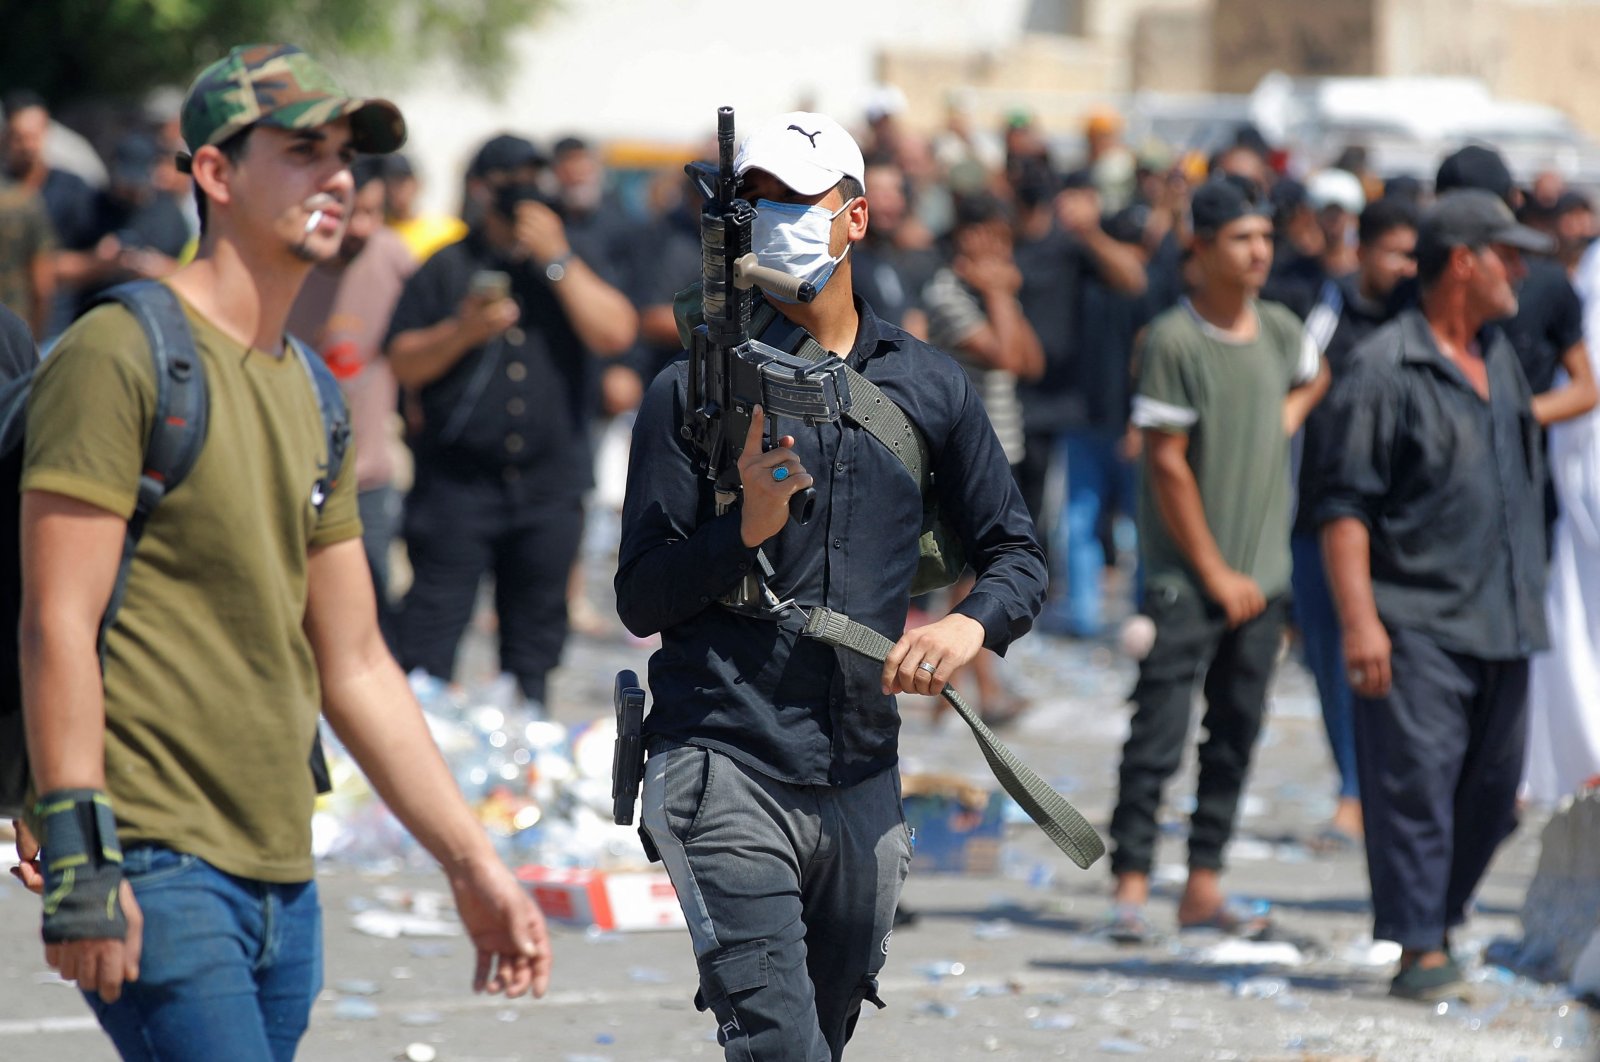 Armed members of Saraya al-Salam (Peace Brigade), the military wing affiliated with Shiite cleric Moqtada al-Sadr, are pictured during clashes with Iraqi security forces in the Green Zone, Baghdad, Iraq, Aug. 30, 2022. (AFP Photo)